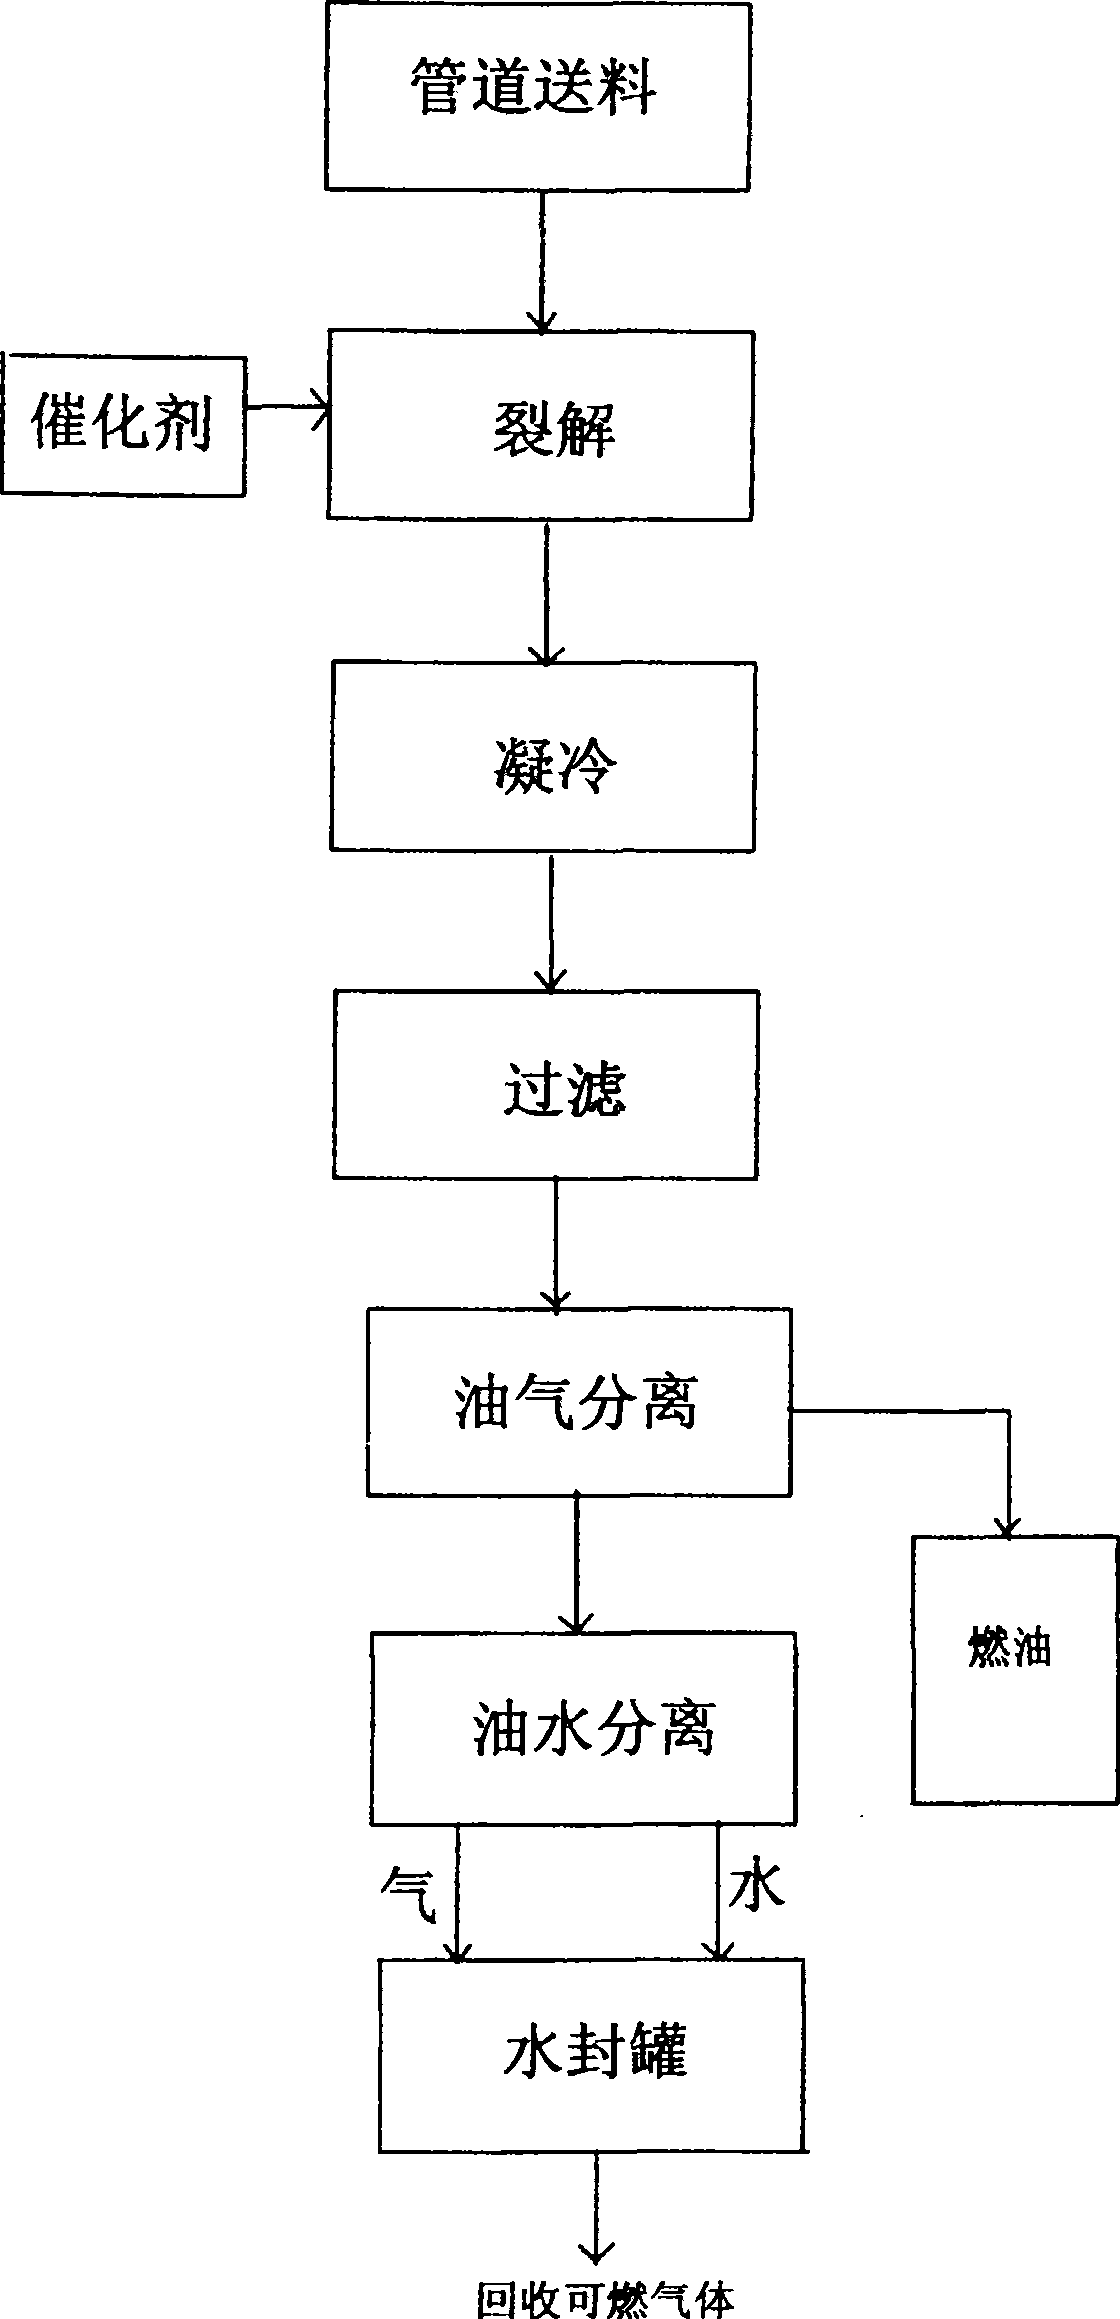 Waste plastic and rubber reduction and reducing system